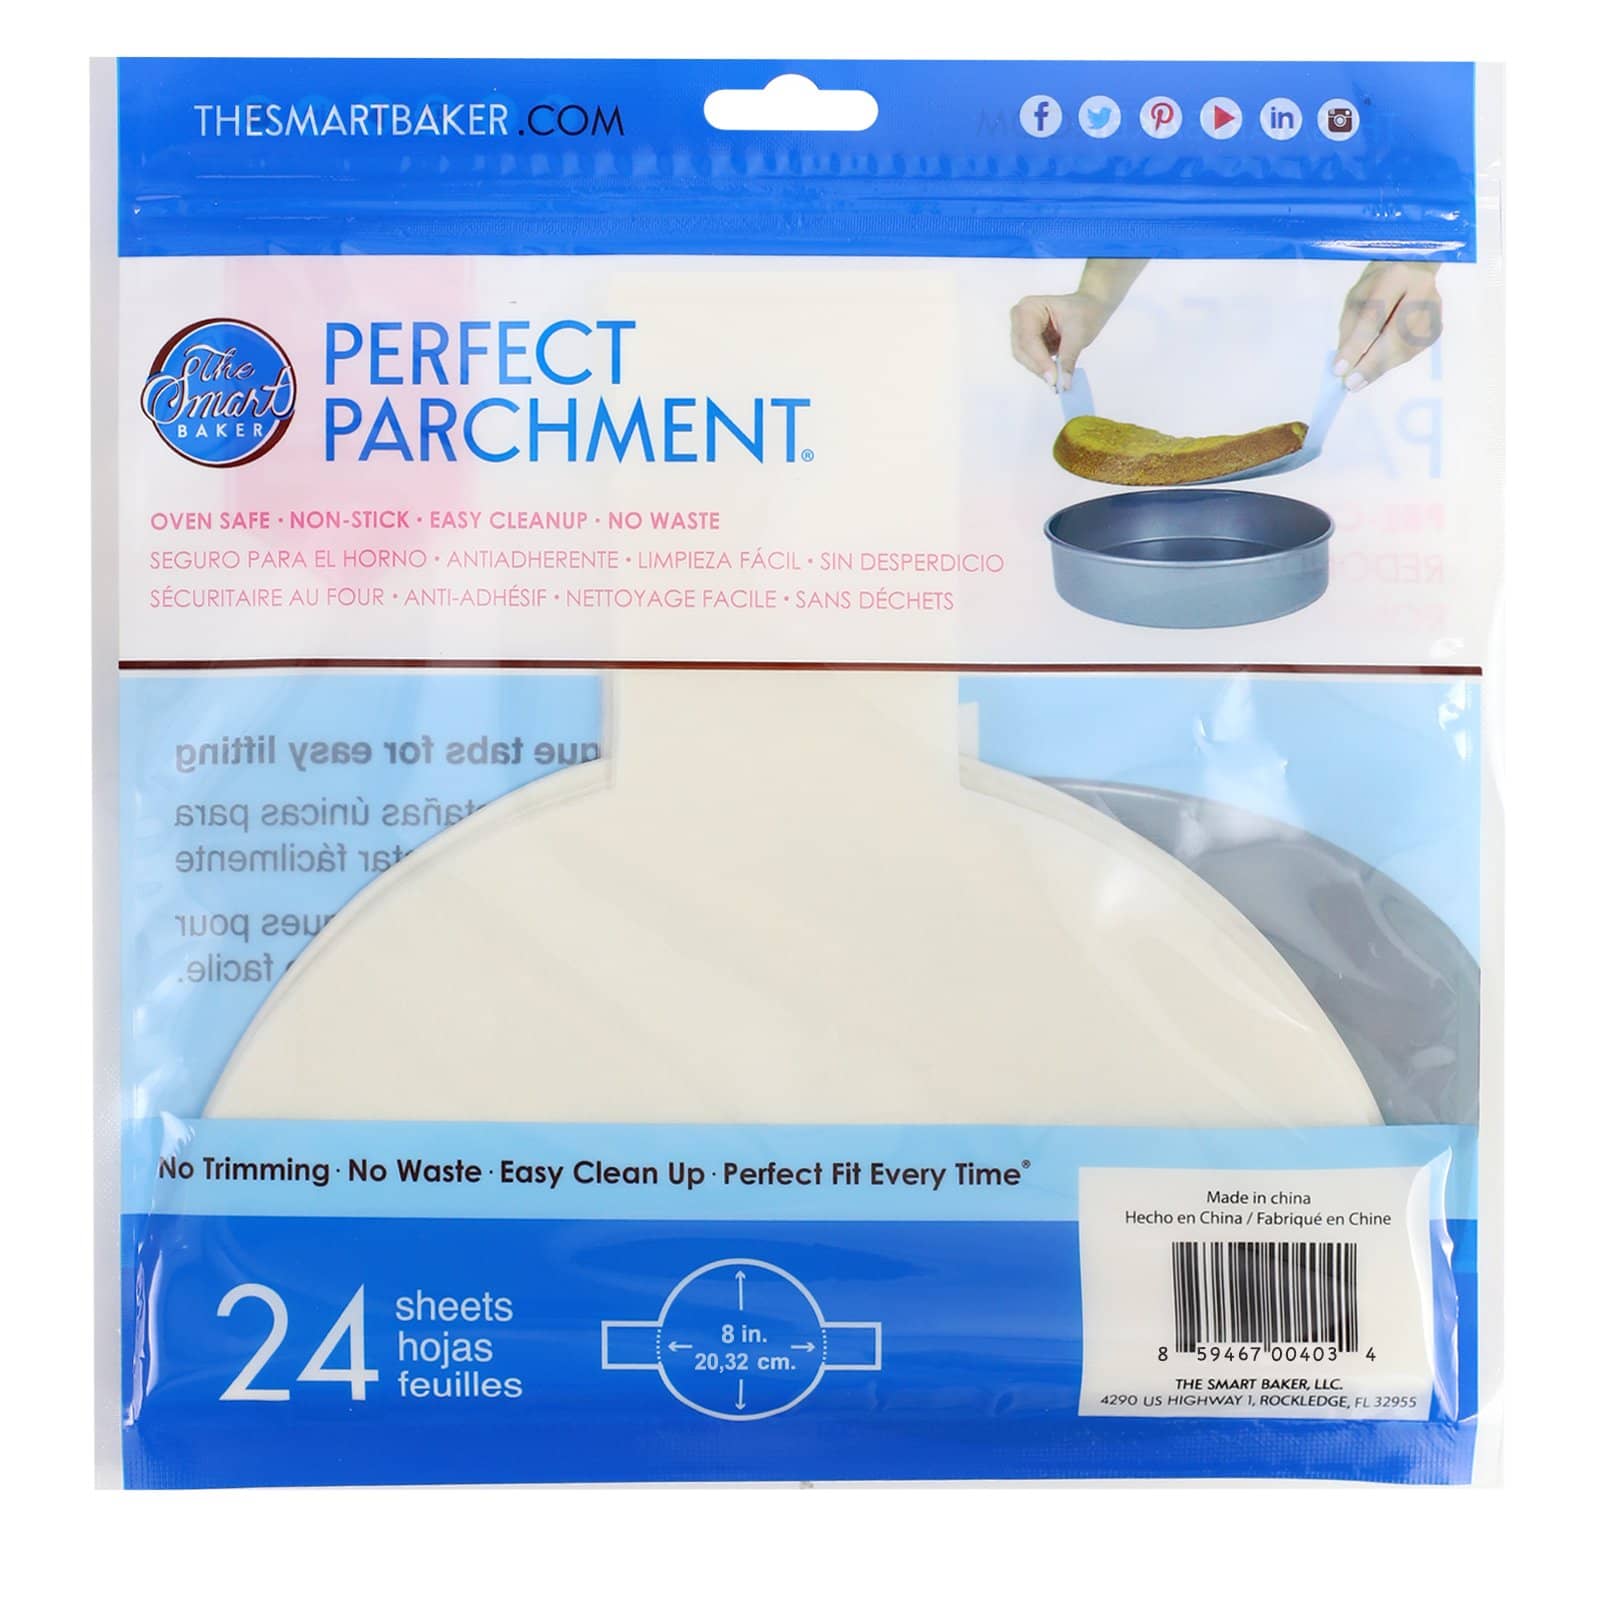 Baker's Choice Parchment Paper Roll, 360ft Roll –